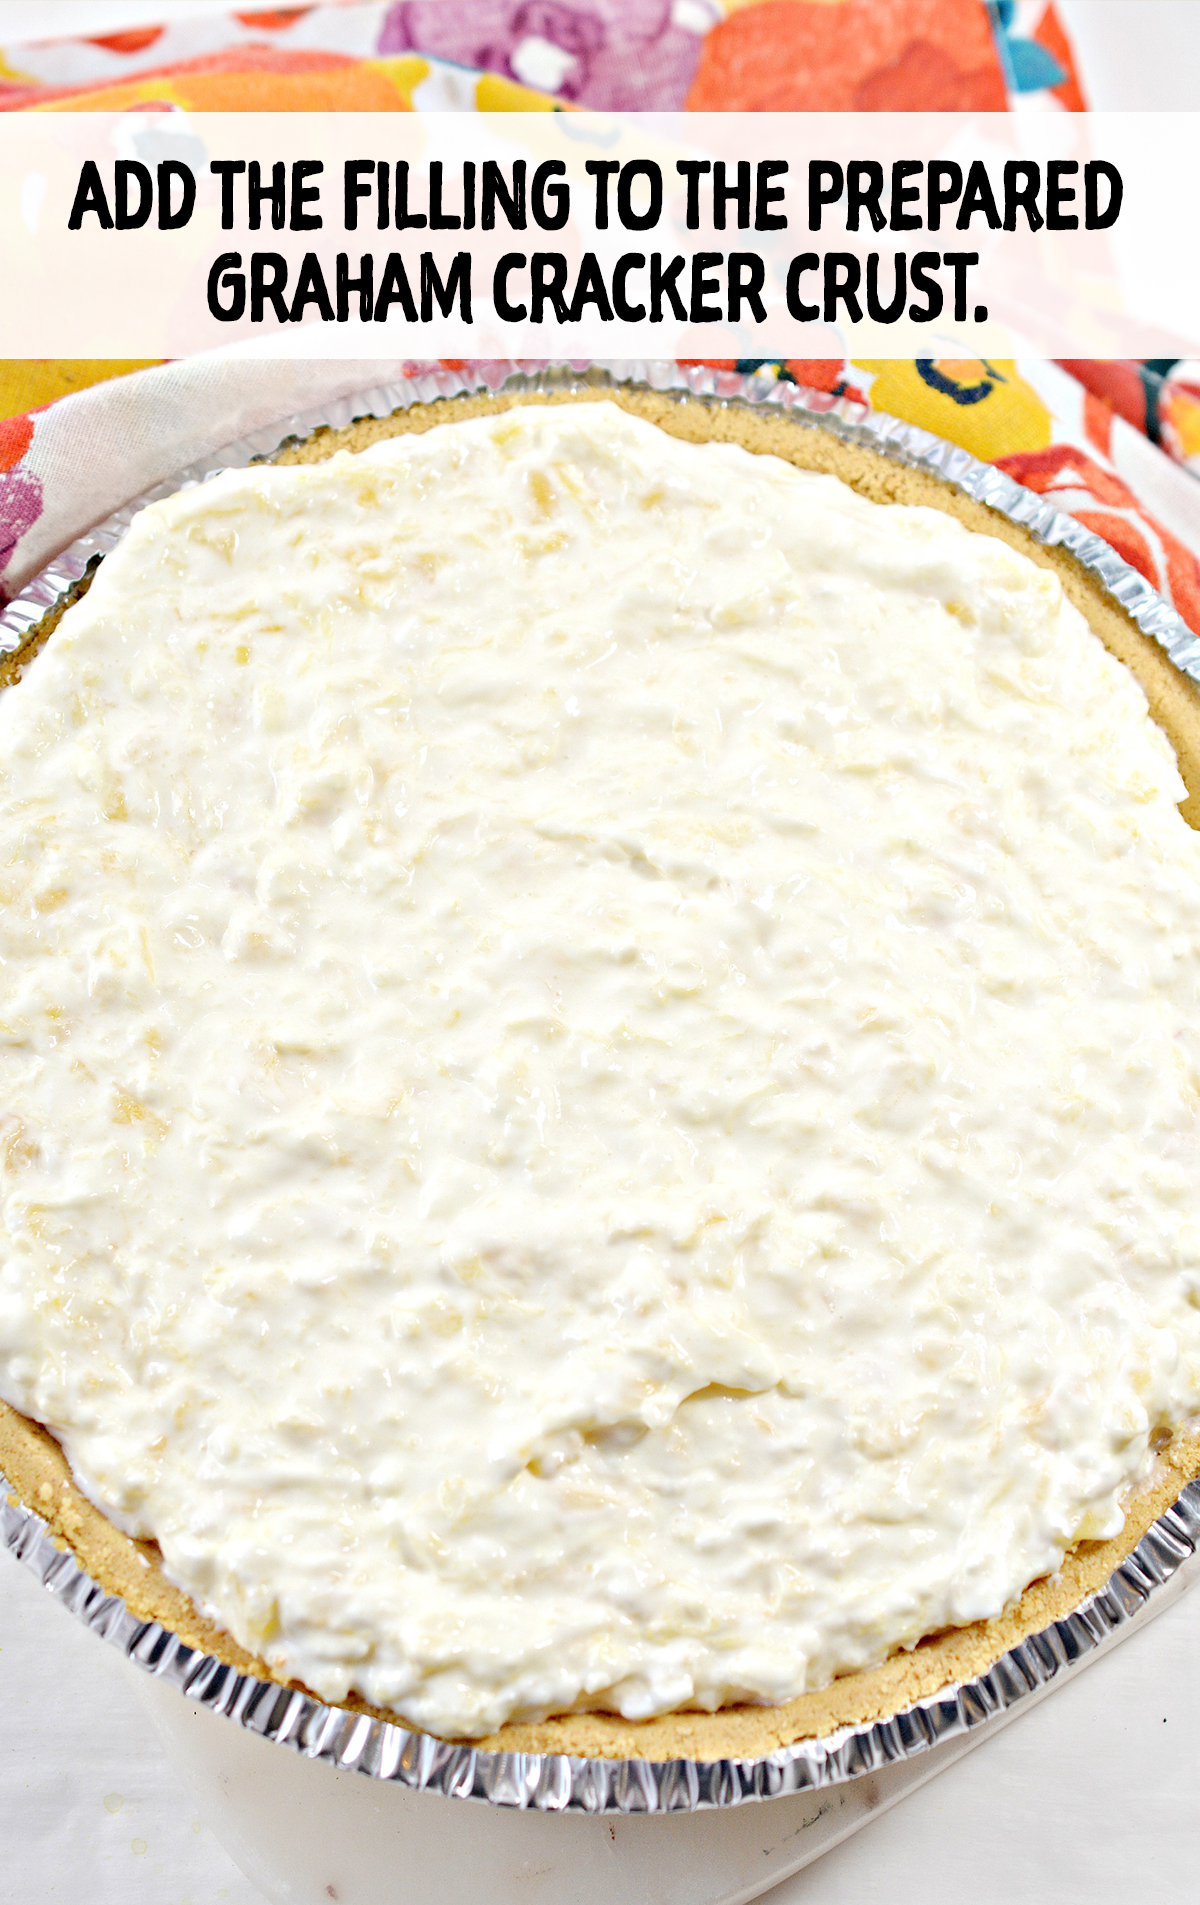 Add the filling to the prepared graham cracker crust, and place it into the fridge or freezer to chill until set.